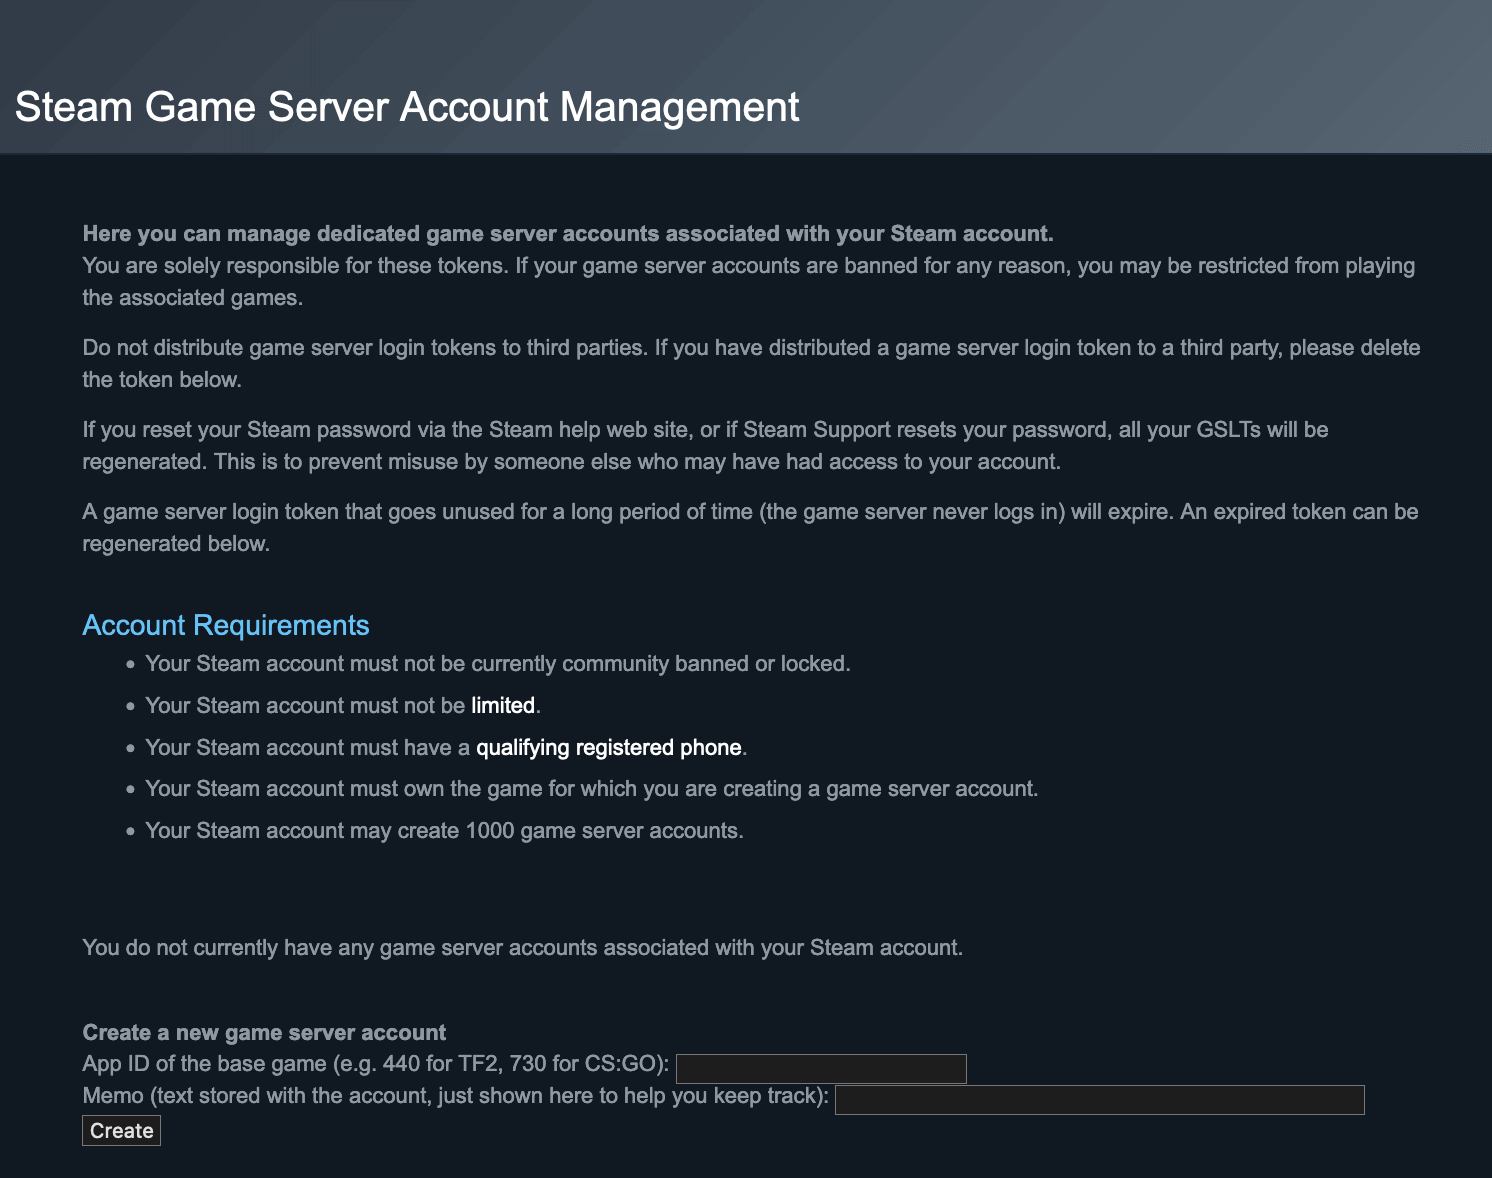 Failed to create account: 24 (This account is banned from creating game server login tokens)